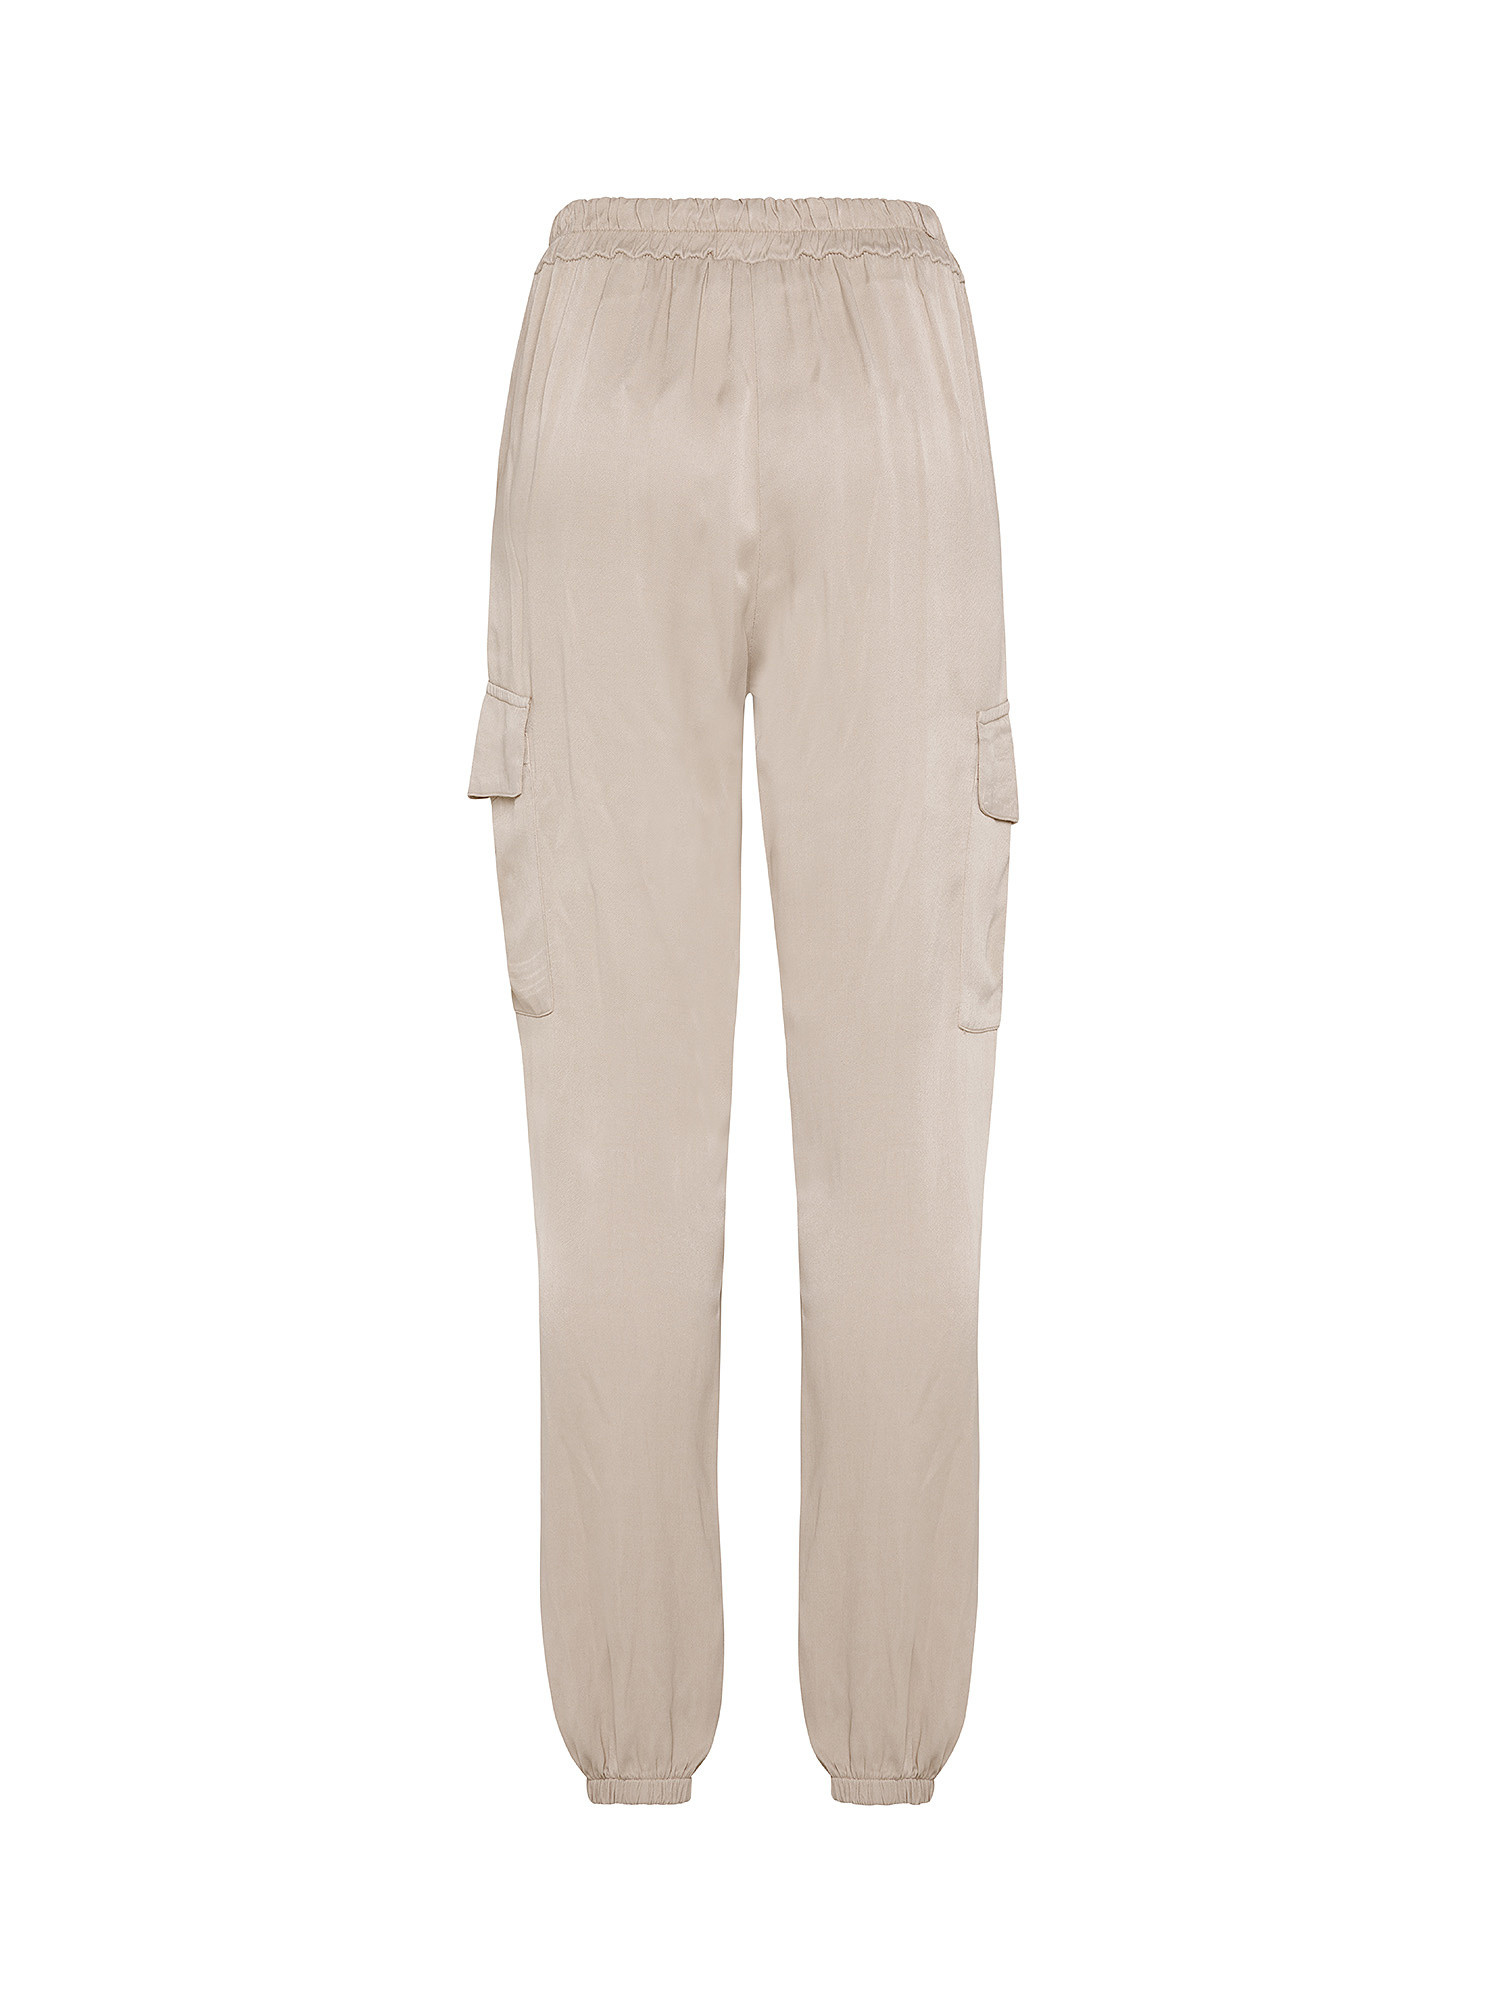 Cargo trousers, Beige, large image number 1